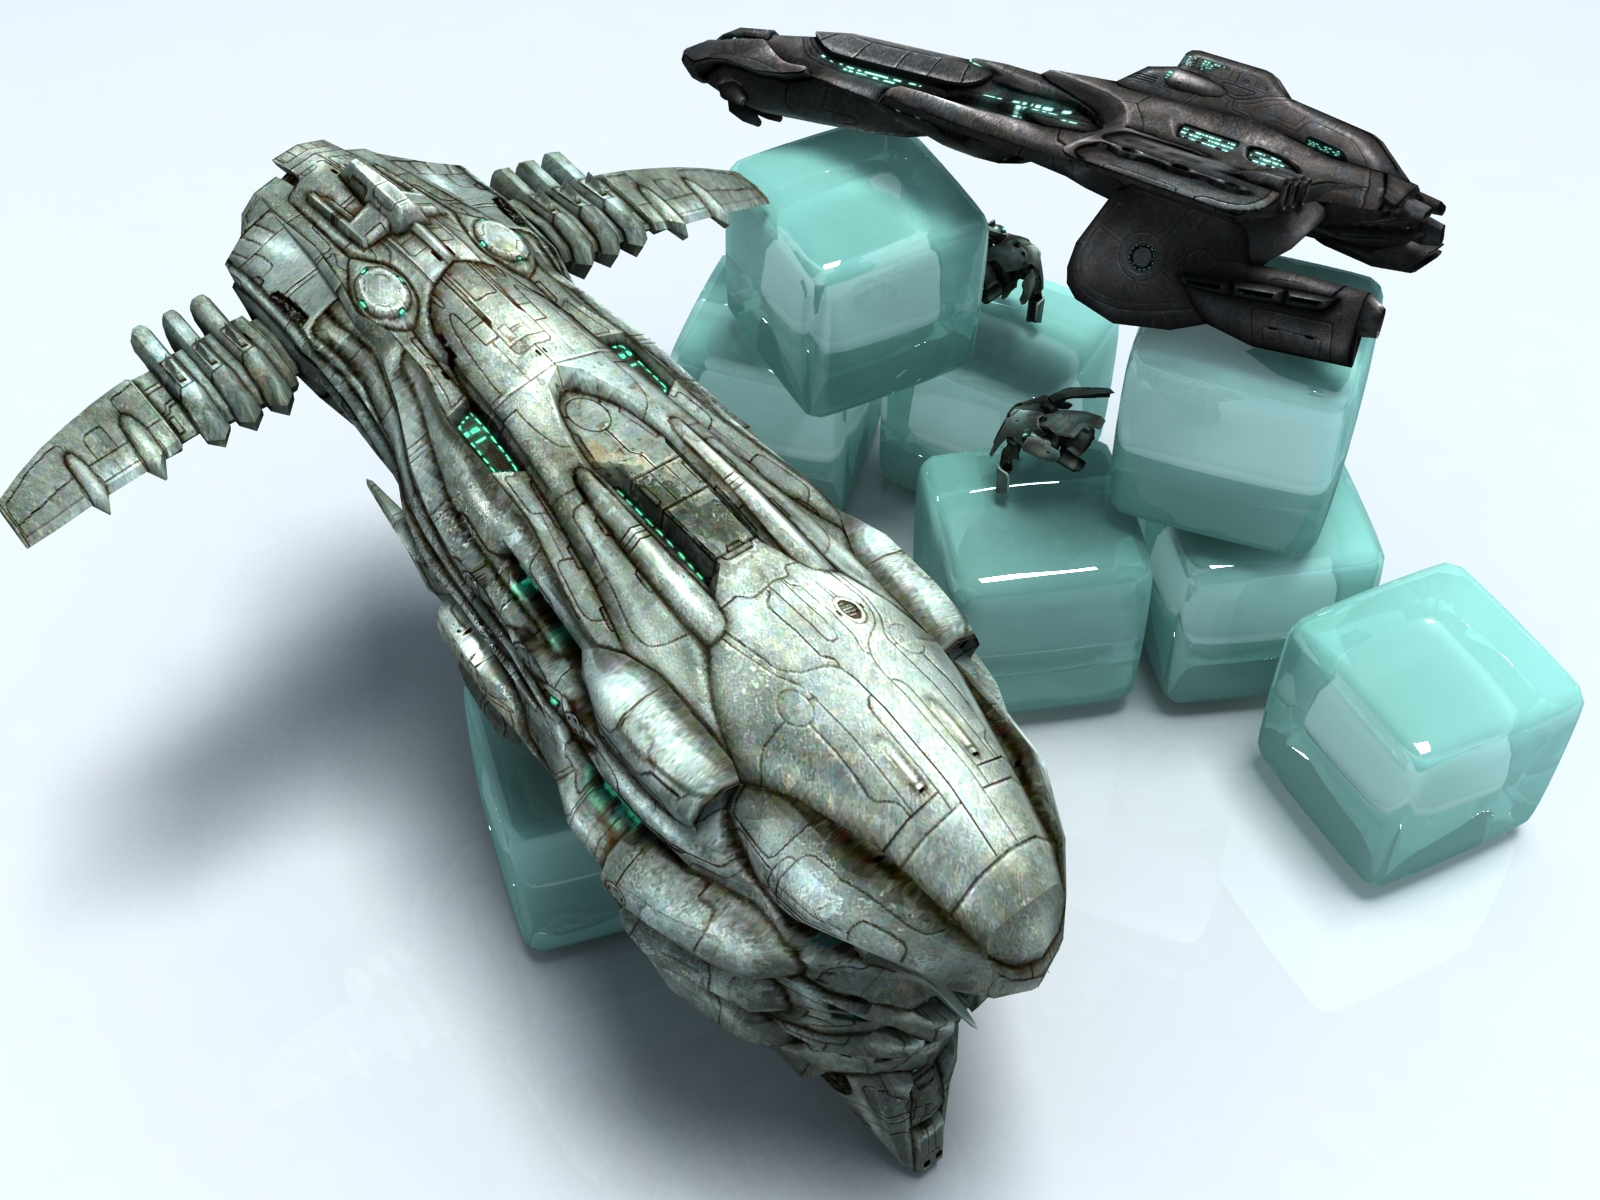 video game, eve online, mmorpg, multiplayer, ship, space